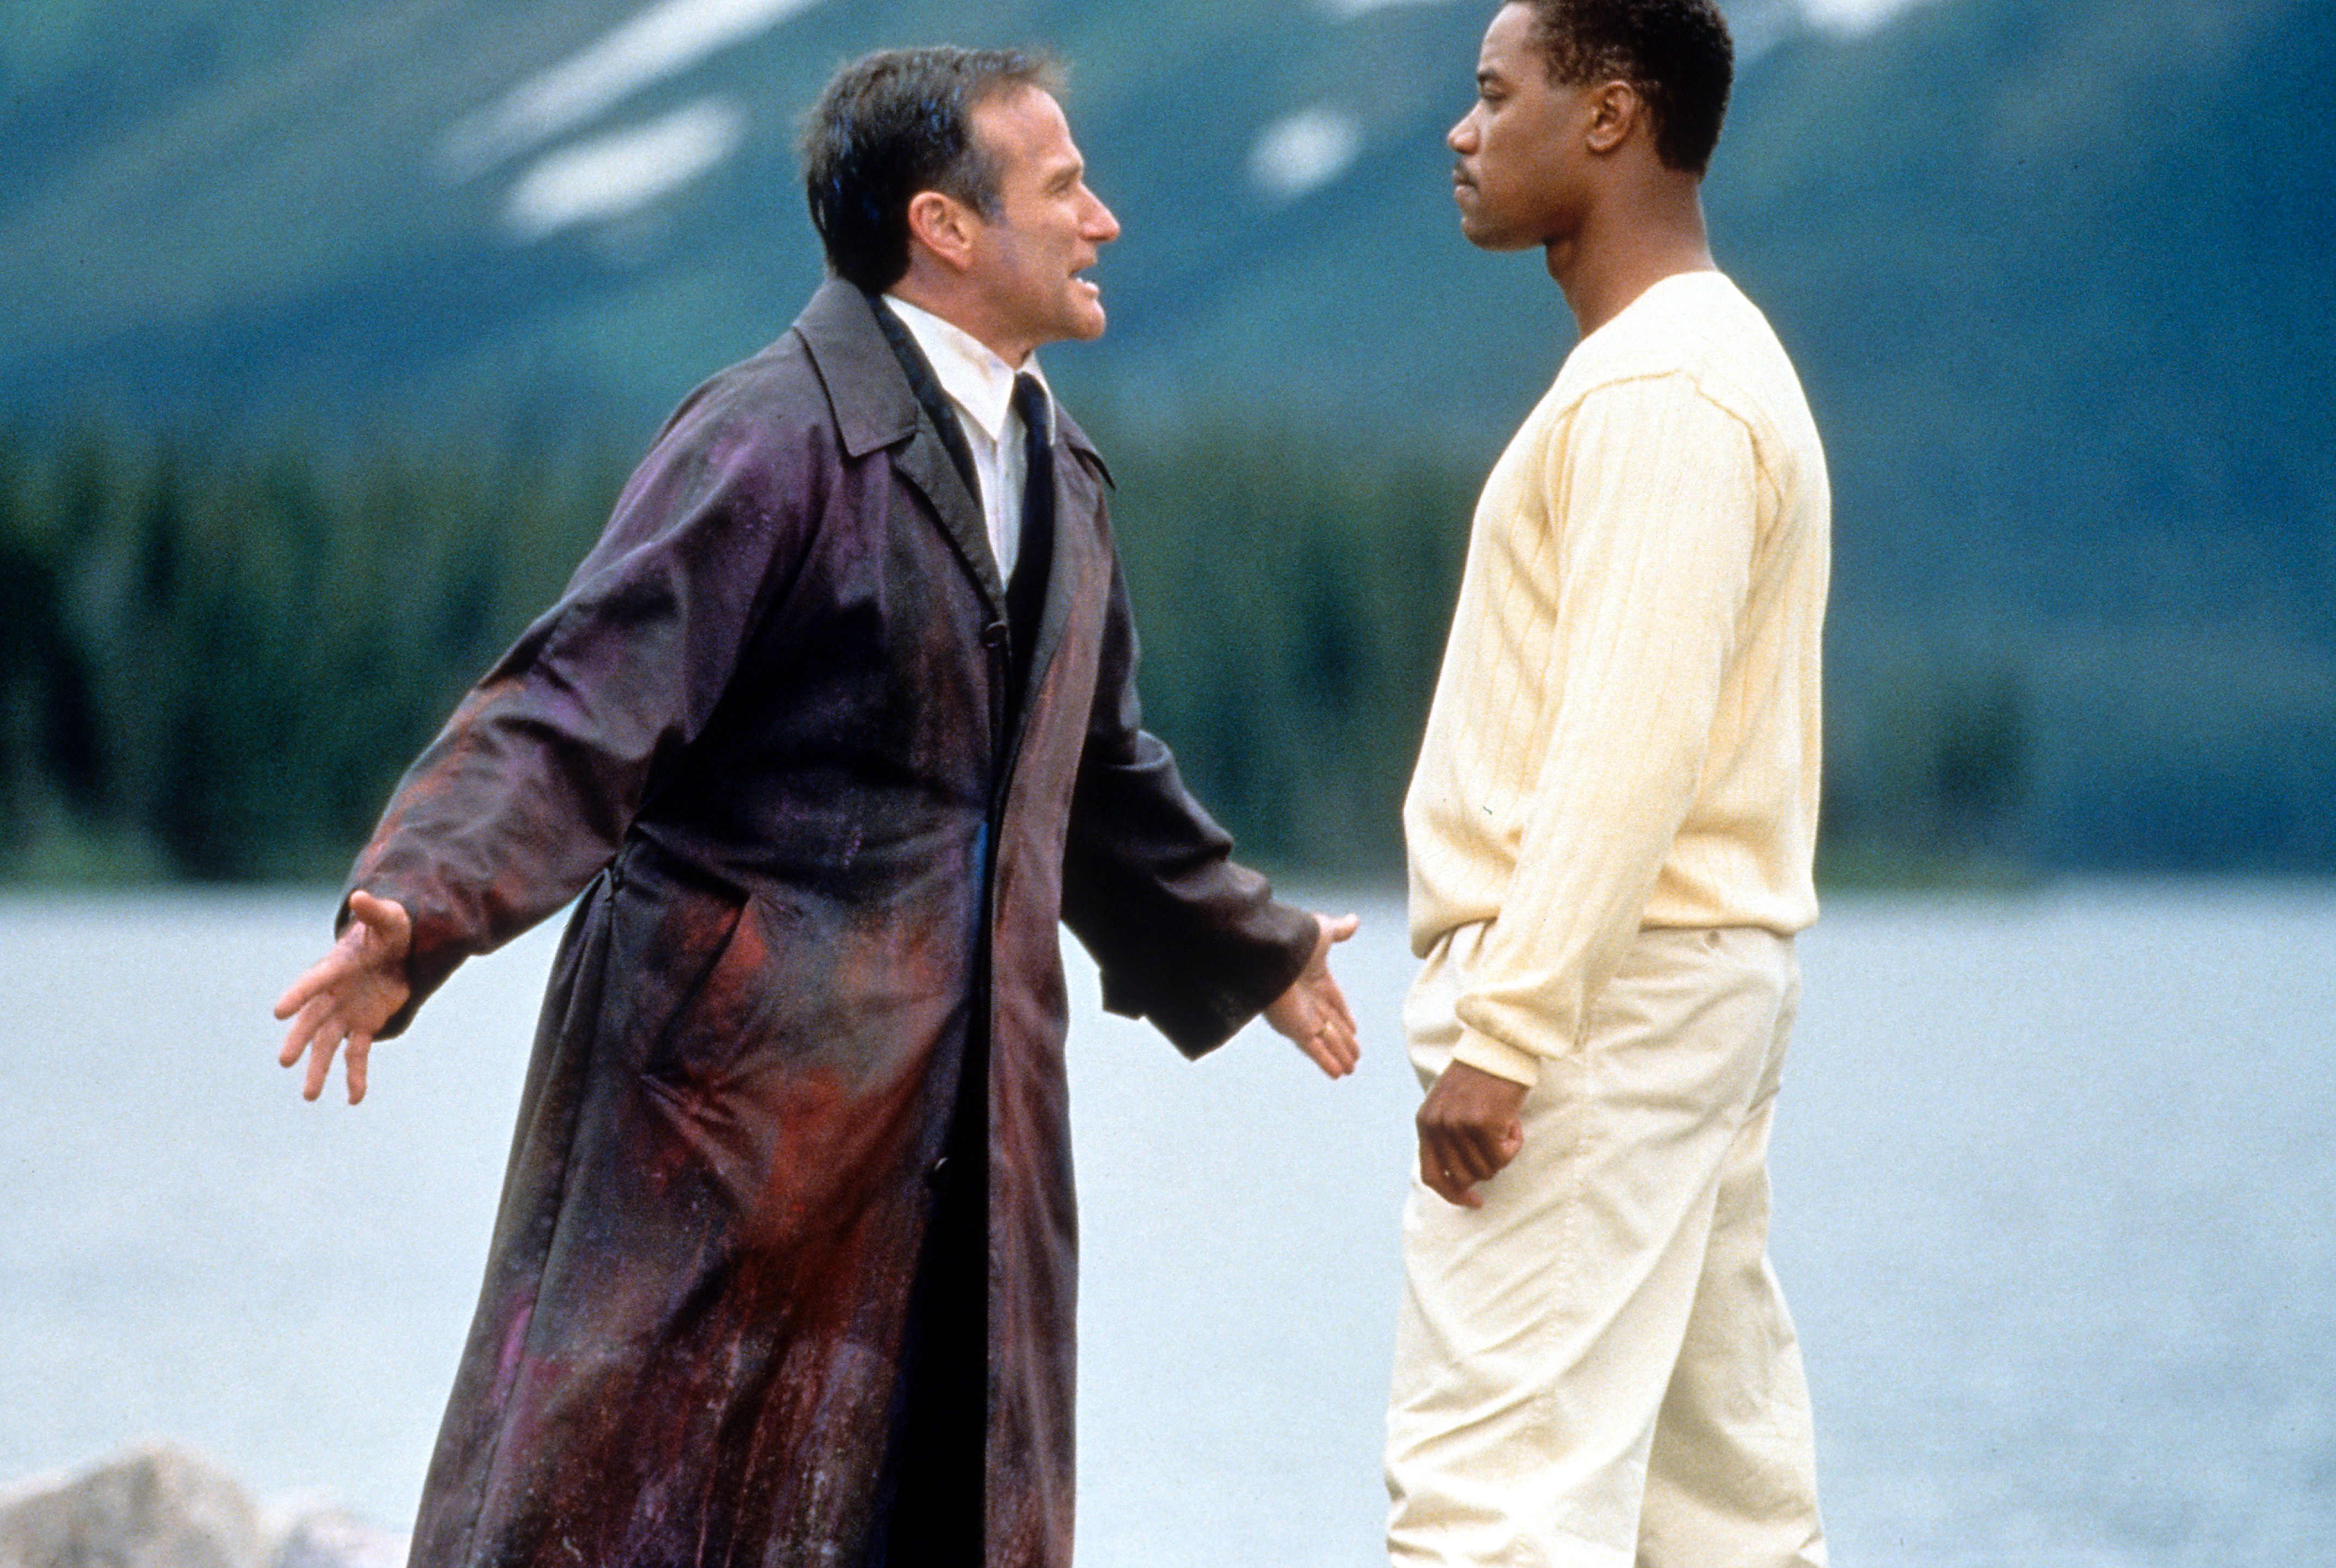 Robin Williams confronts Cuba Gooding Jr in a scene from the film 'What Dreams May Come', 1998. (Photo by Polygram Filmed Entertainment/Getty Images)